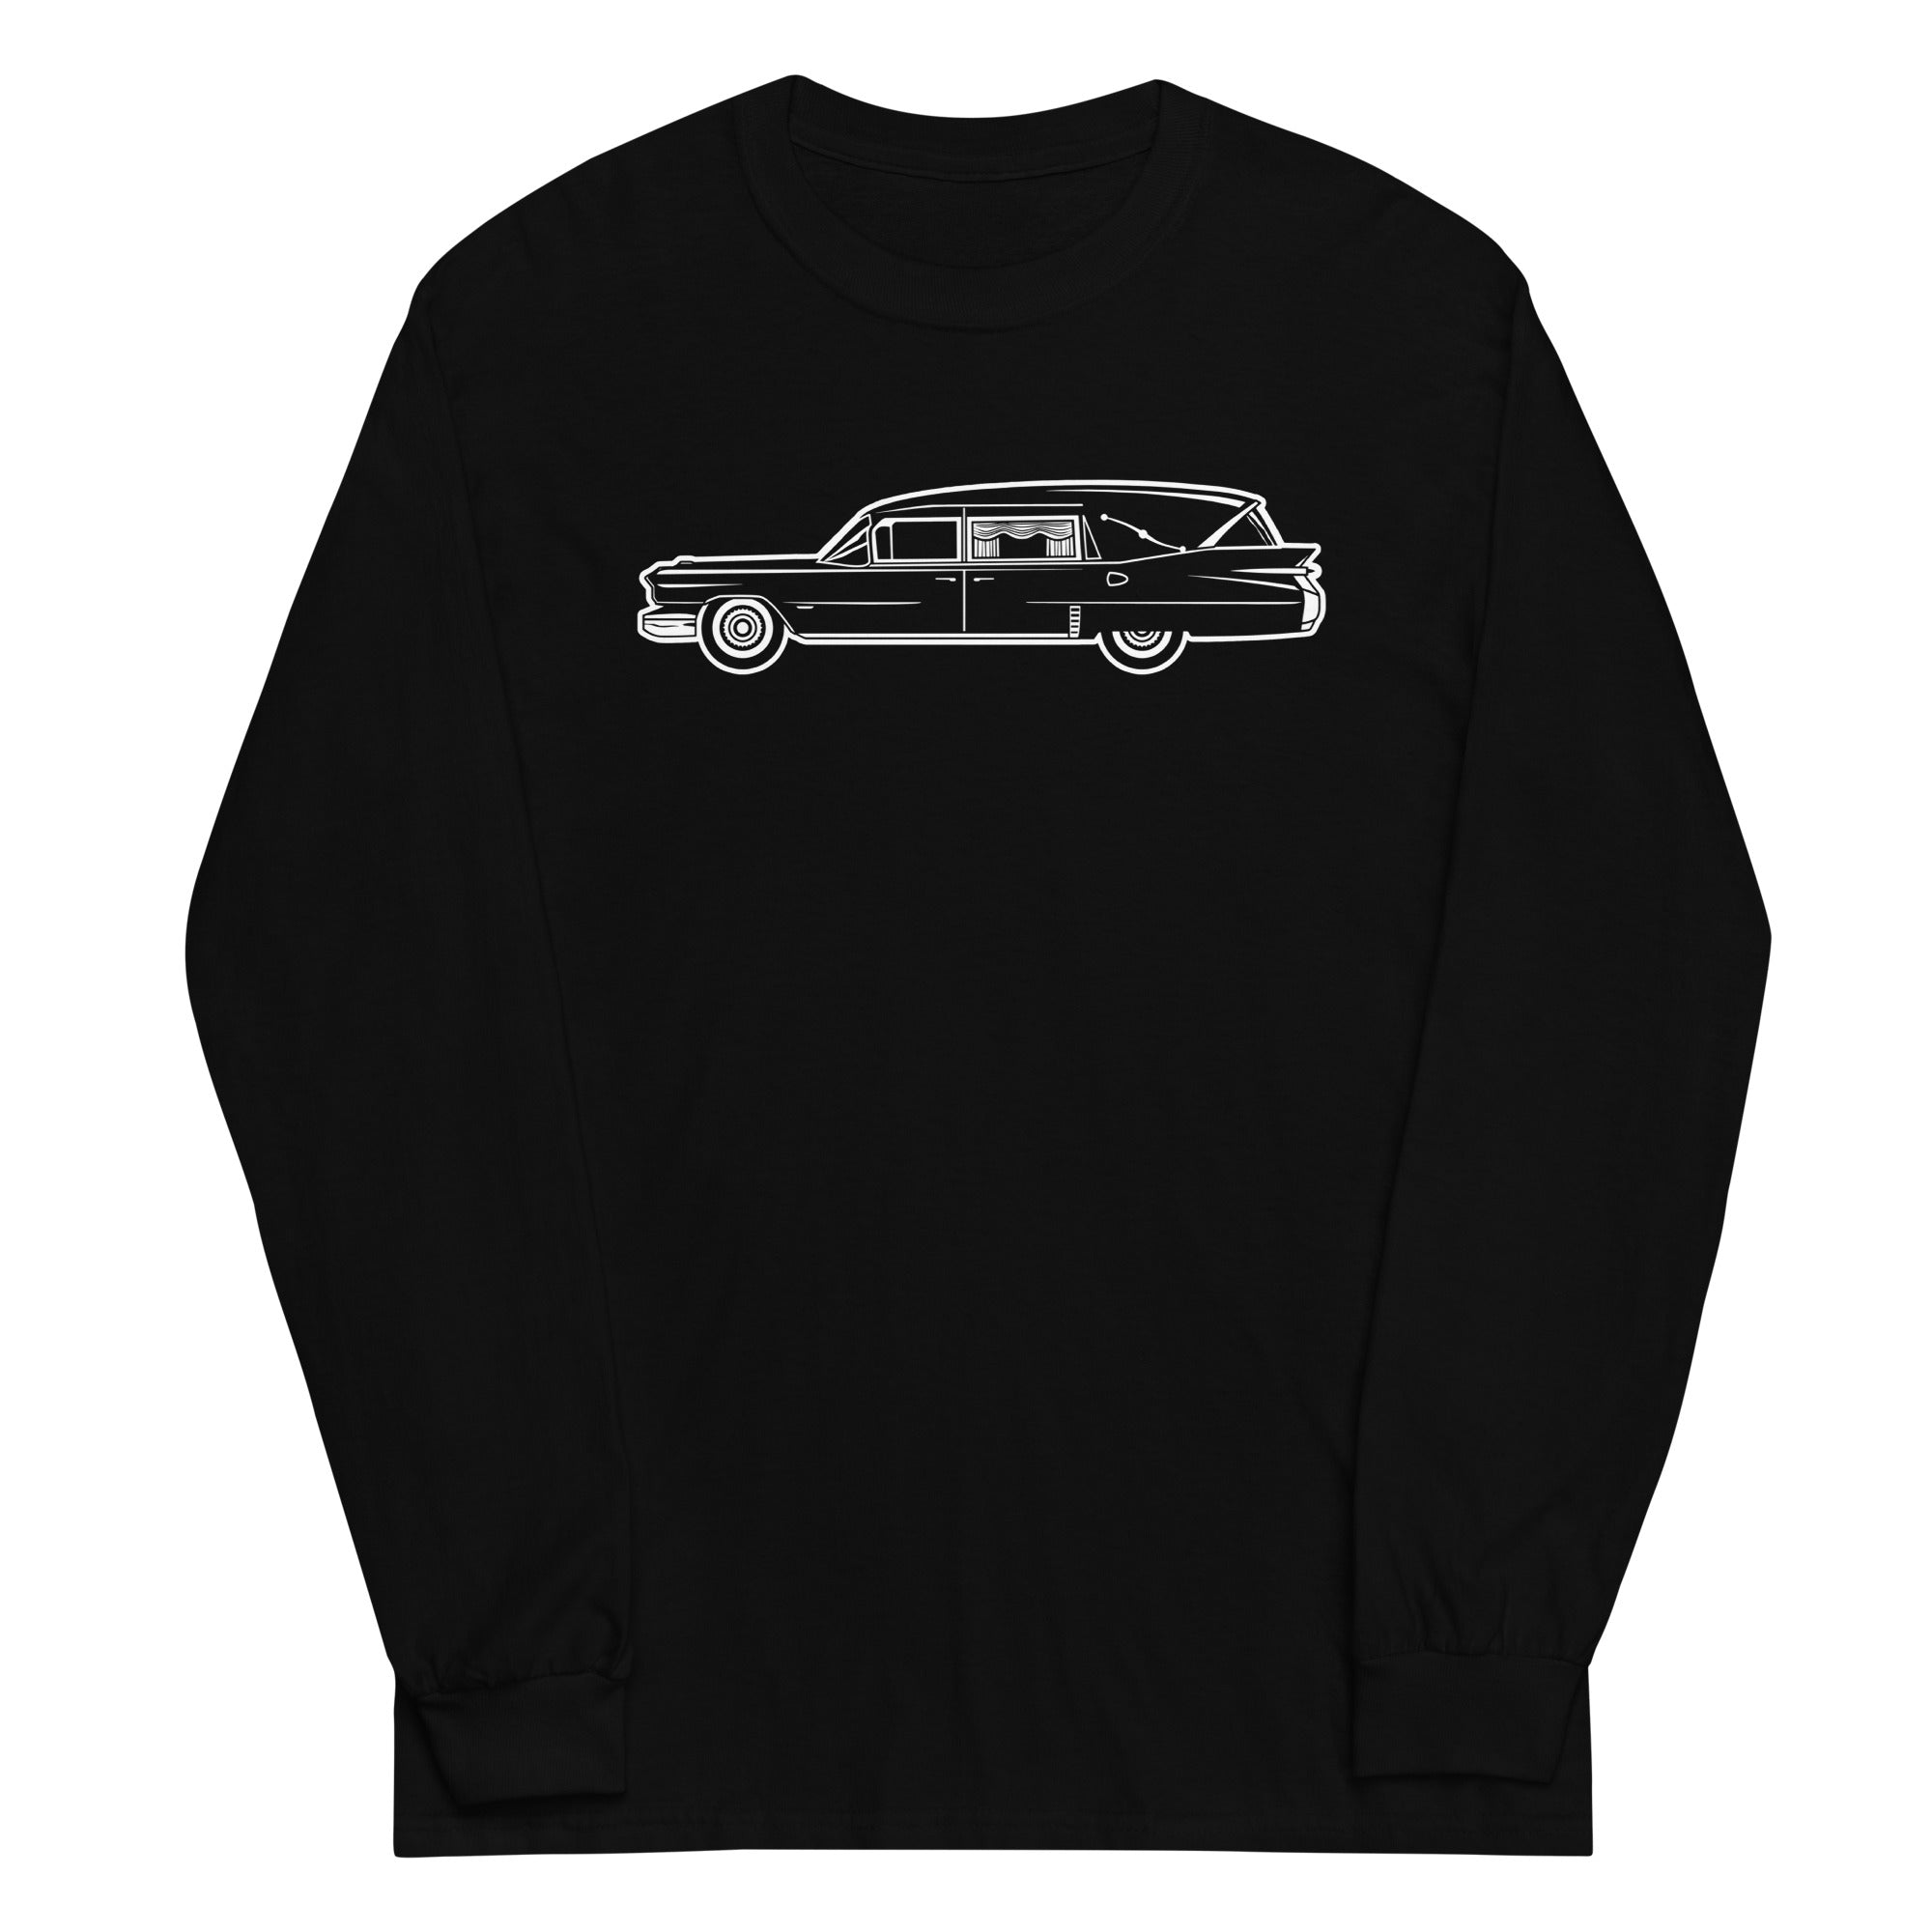 Classic Funeral Hearse Car Gothic Halloween Ride Long Sleeve Shirt - Edge of Life Designs